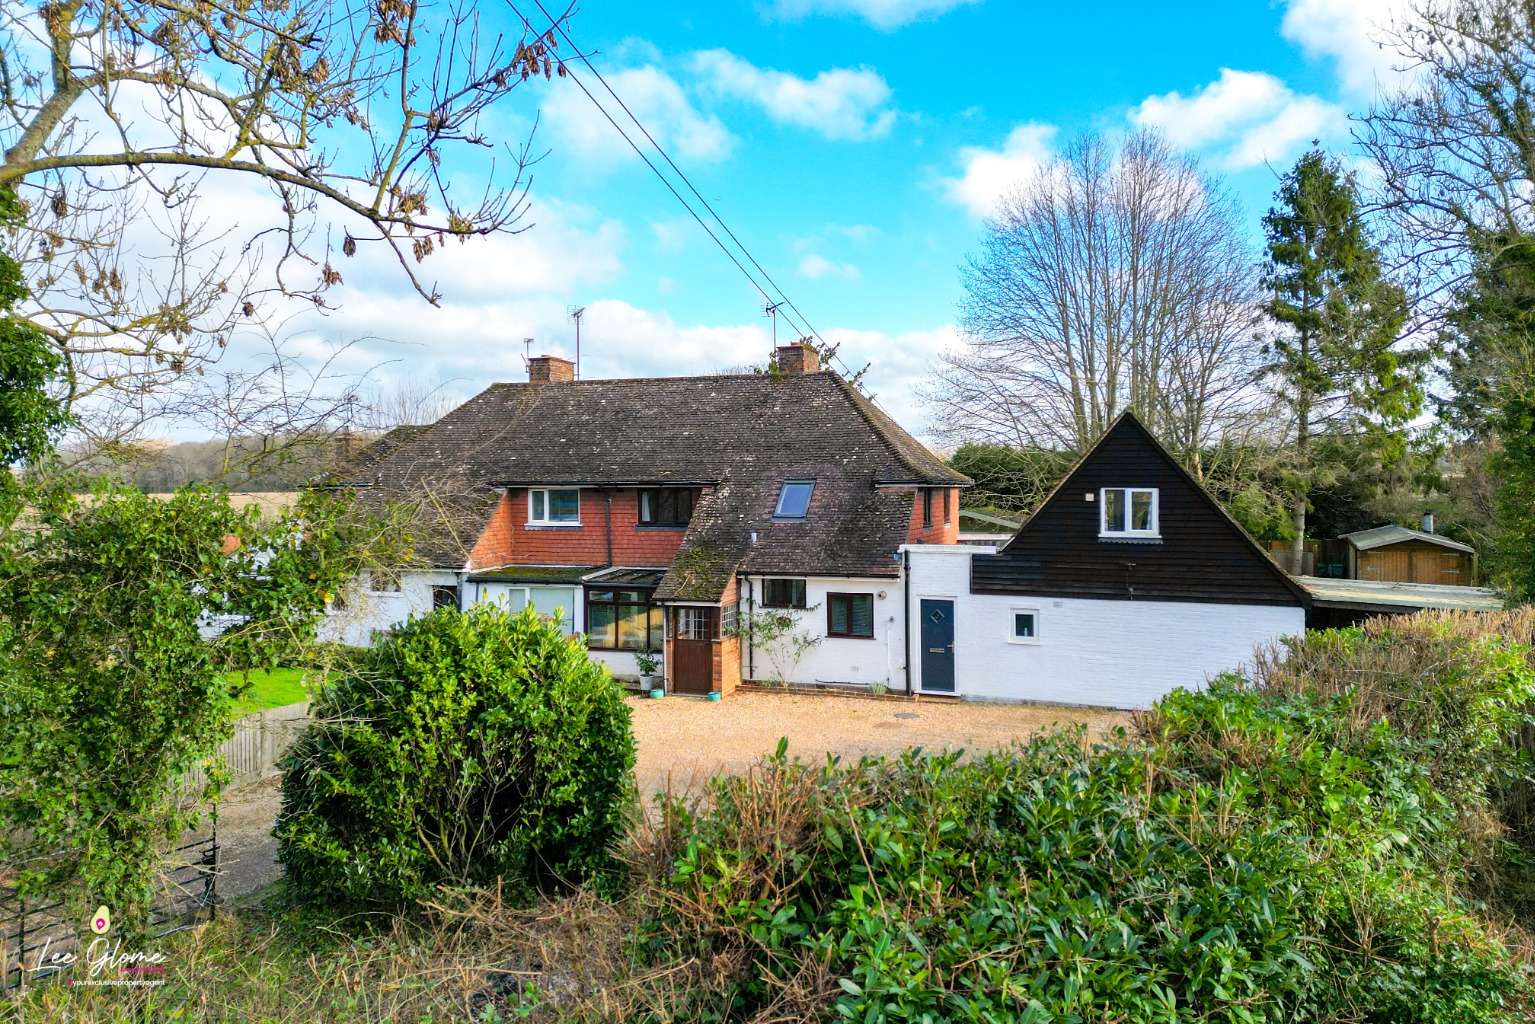 4 bed semi-detached house for sale in Loxwood Road, Cranleigh - Property Image 1